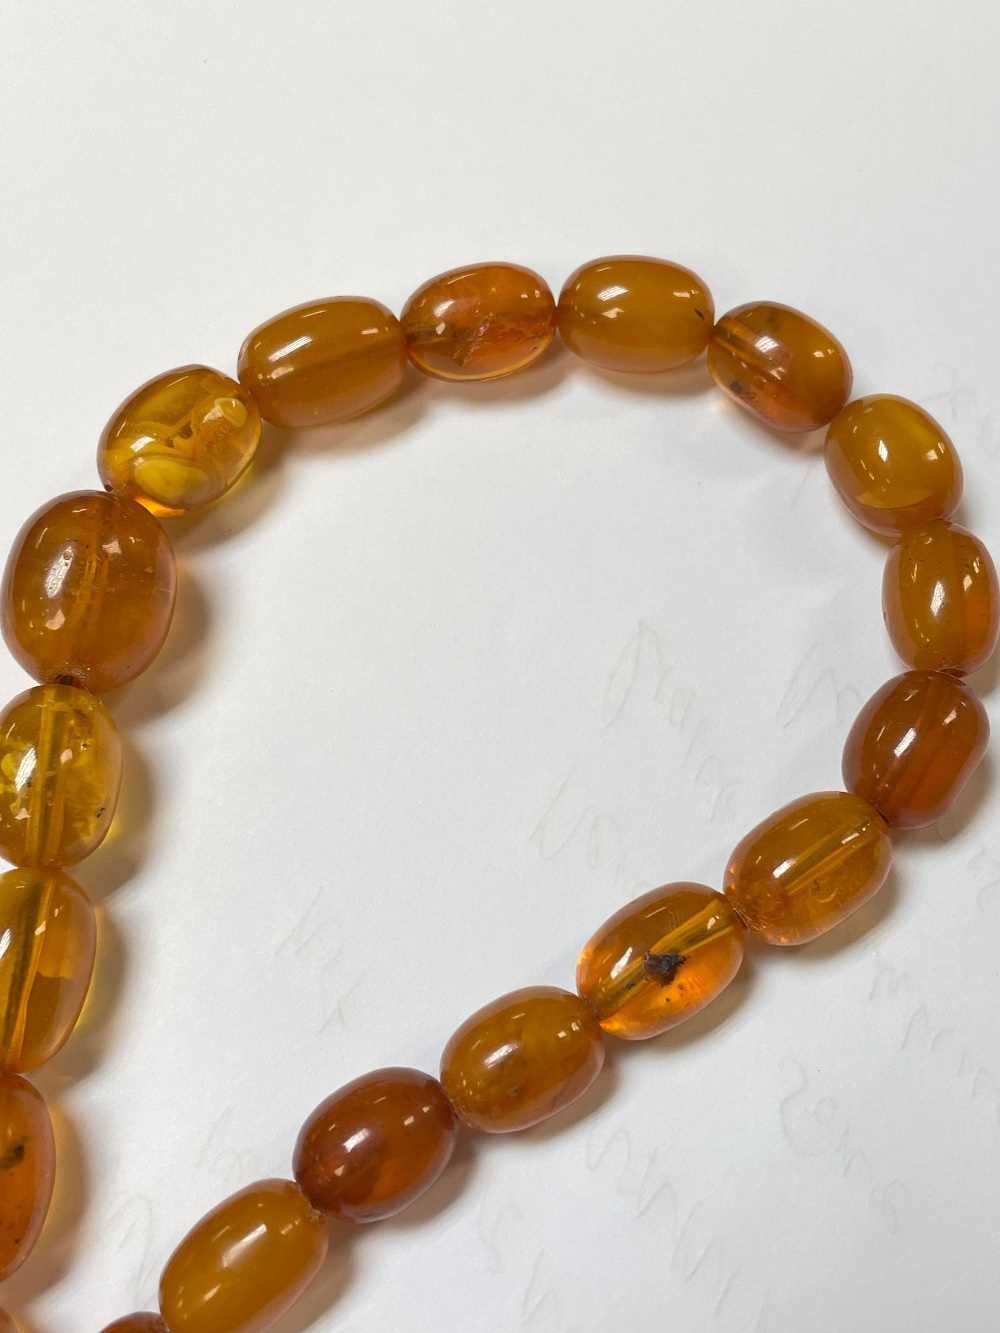 SINGLE STRAND AMBER BEAD NECKLACE, beads 13mm to 20mm, approx gross wt. 55gms - Image 4 of 13